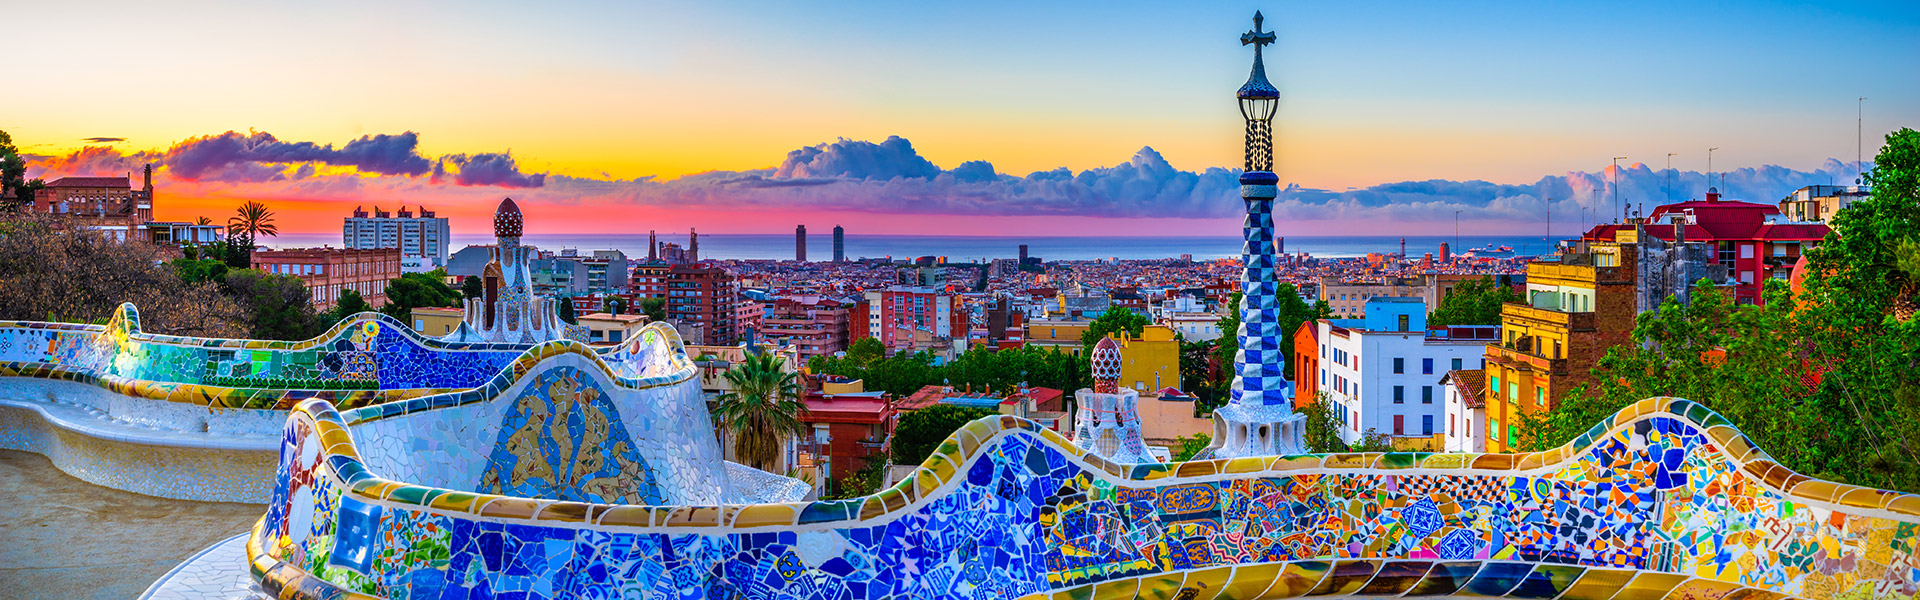 Don't miss the best offers for an unforgettable trip to Spain 
Barcelona from $105